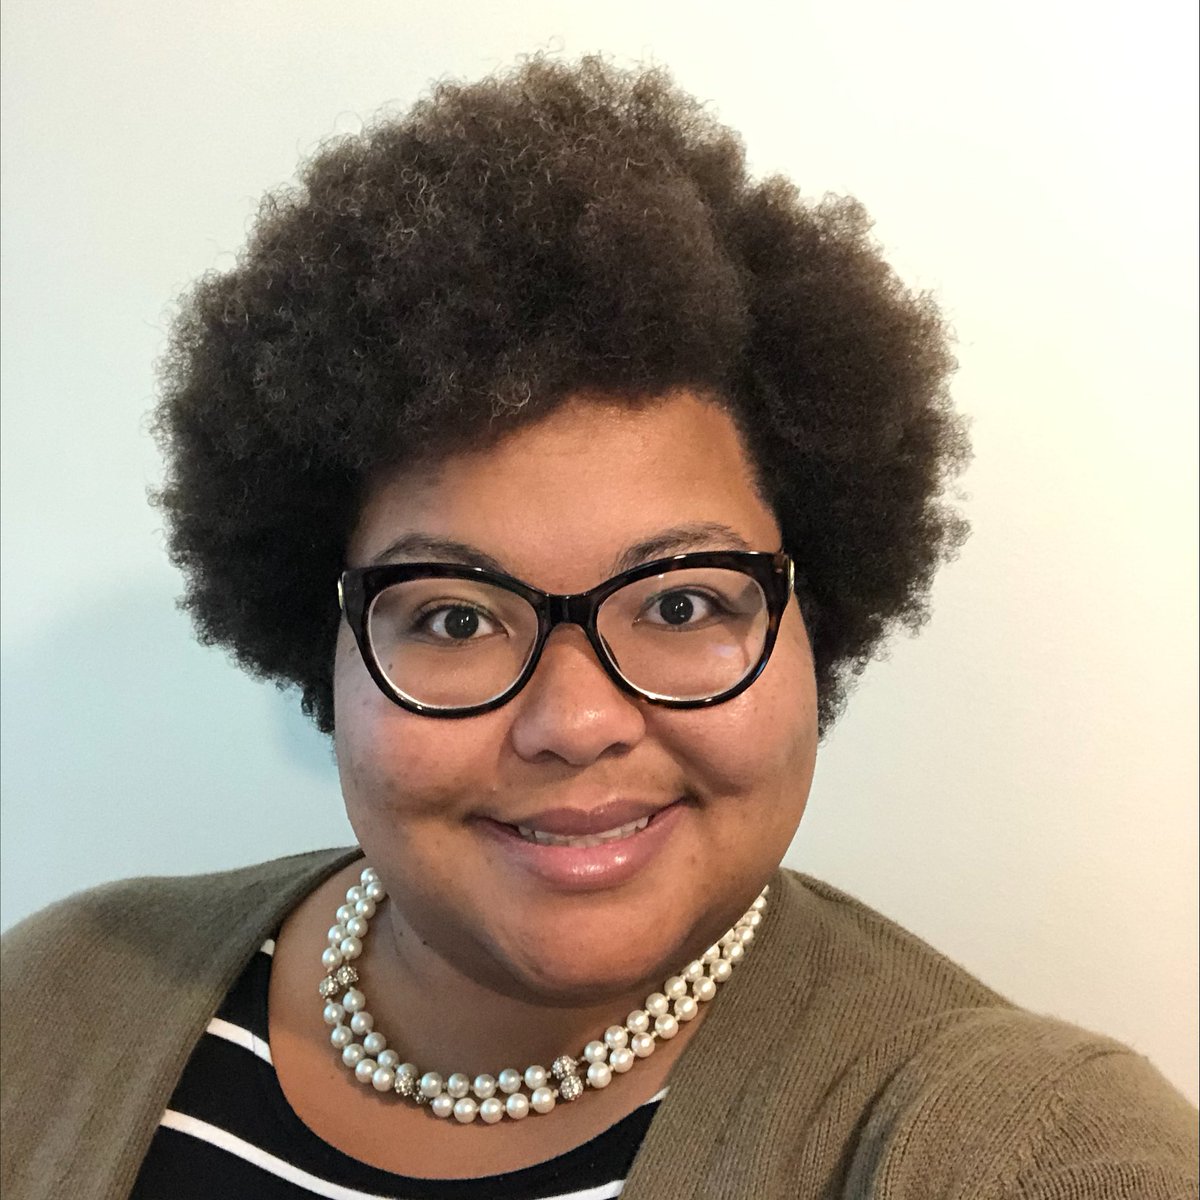 Congrats to Dr. Sheena Rancher from our SPED Dept for receiving 2 BSU Awards for Excellence! She has been recognized with the Racial Justice, Equity, & Inclusion Emerging Leader Faculty and Librarian Award, & the Faculty & Librarian Award for Excellence in Academic Advising.